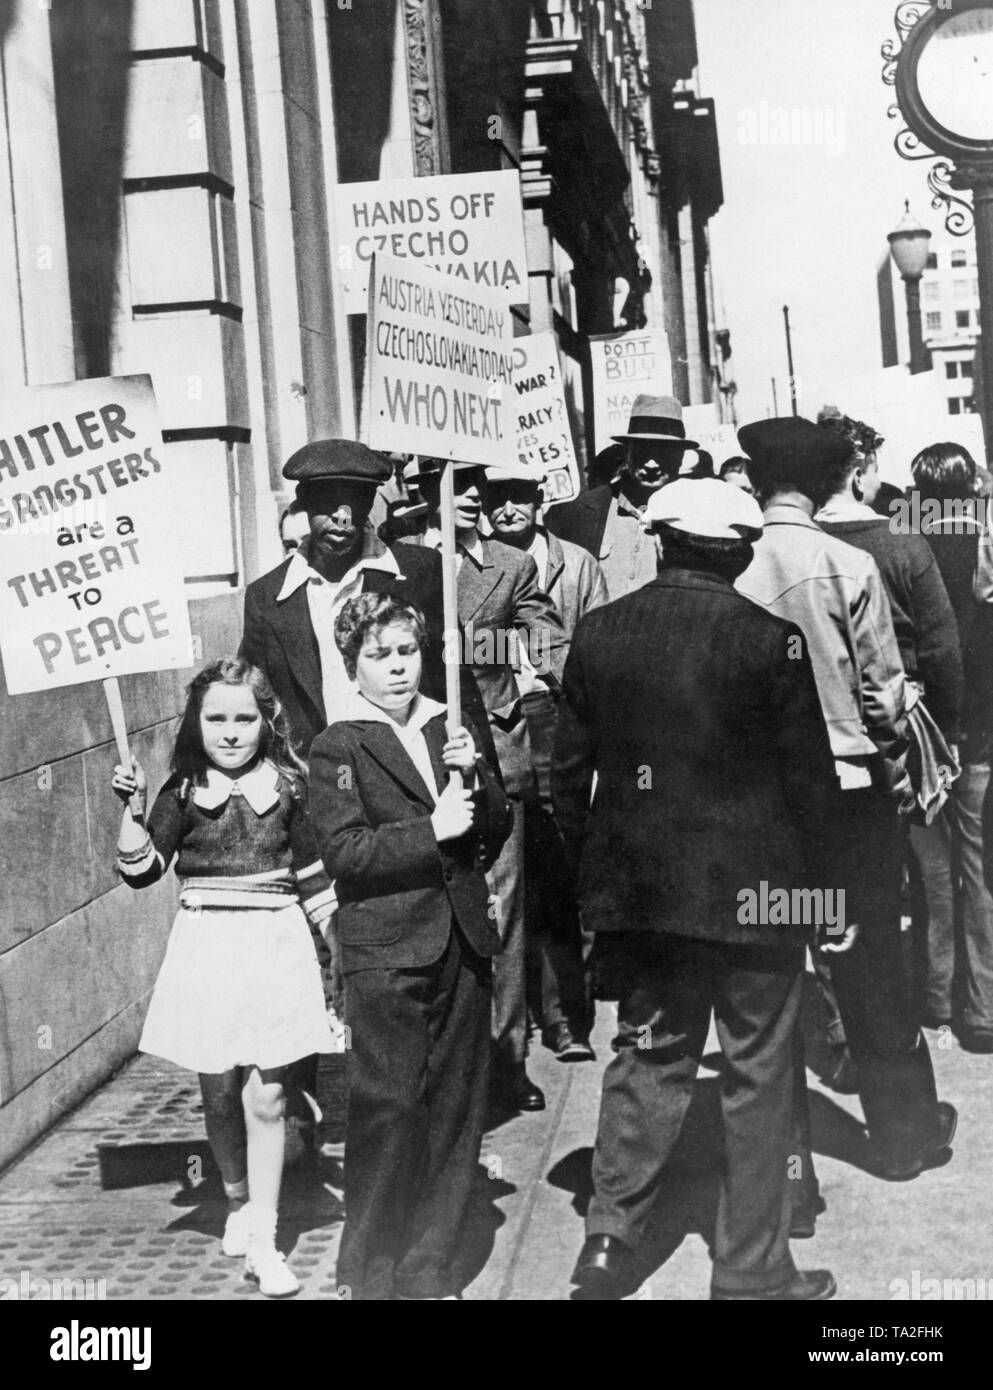 Children carry signs at an anti-Nazi demonstration in San Francisco. On the signs: 'Hitler's gangsters are a threat to peace,' 'Austria yesterday Czechoslovakia today who next.' and 'Hands off Czecho-Slovakia'. In the Sudetenland crisis, Hitler provoked an international conflict to annex the Sudetenland to the German Reich. Stock Photo